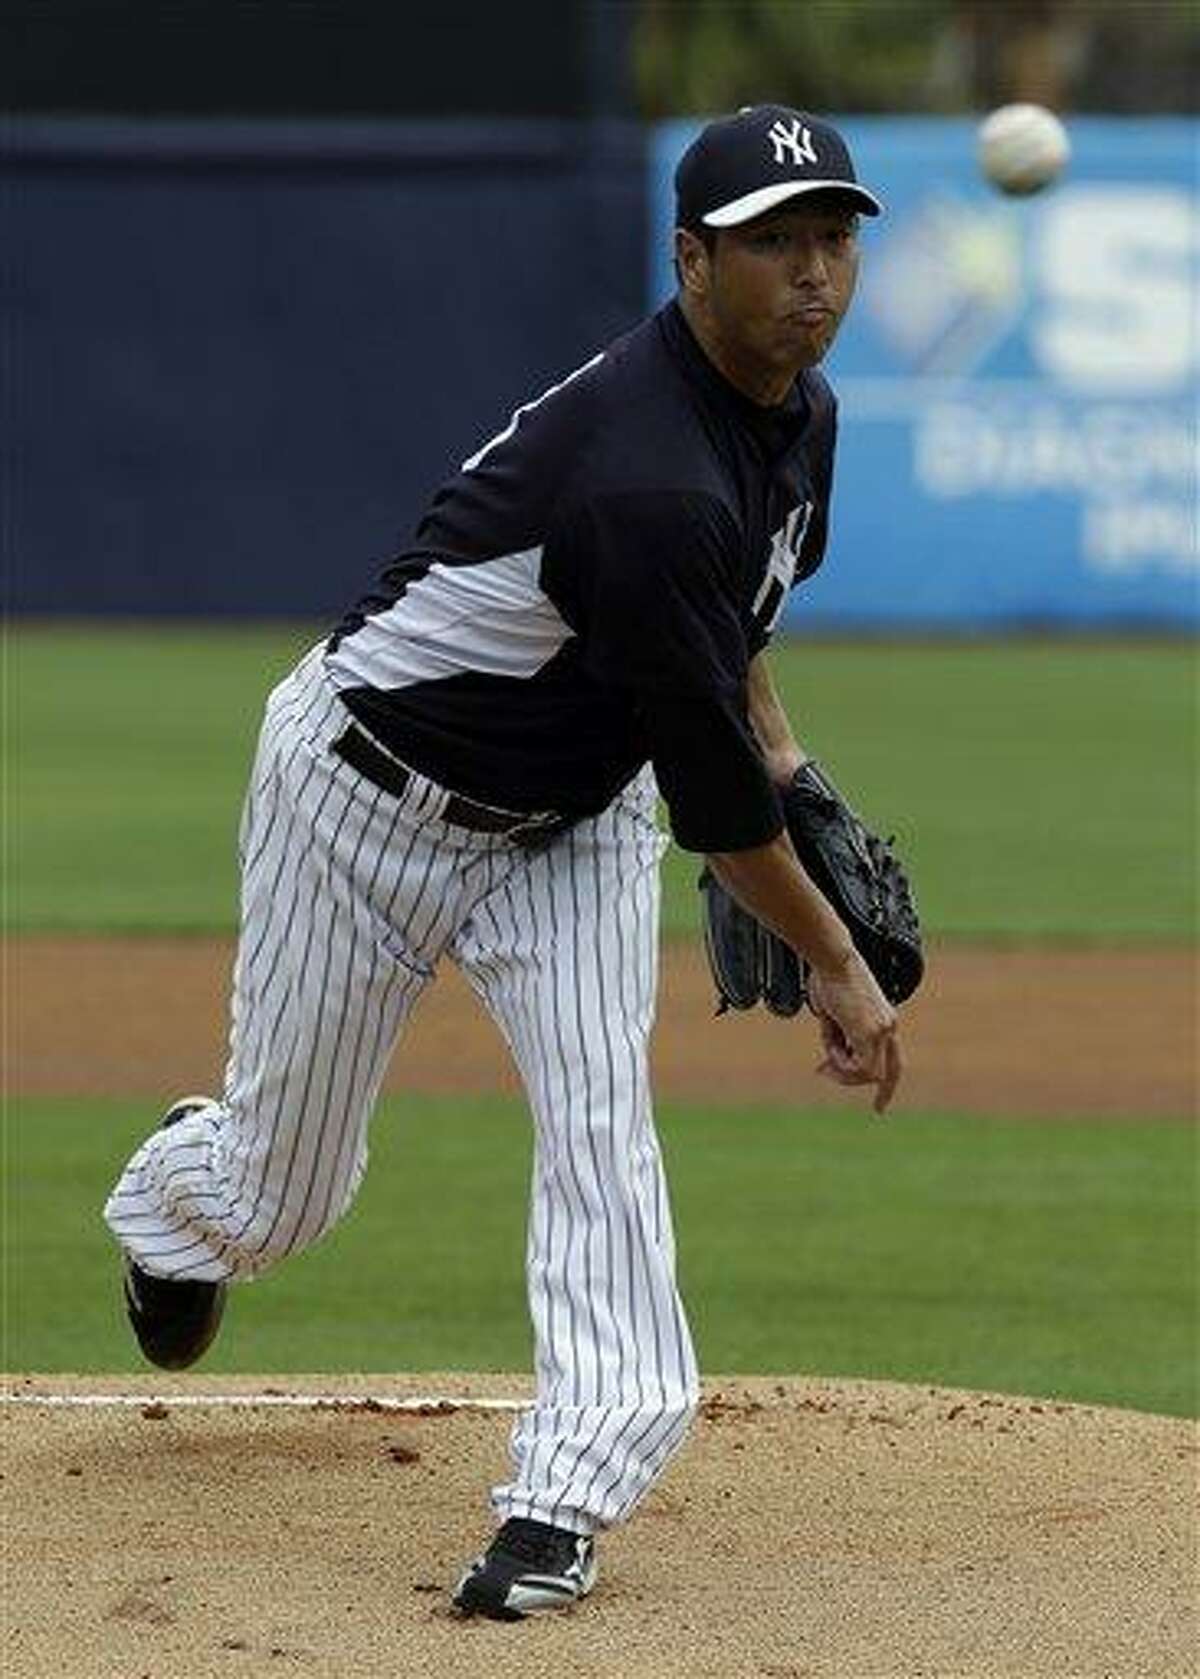 New York Yankees pitcher Hiroki Kuroda, of Japan, delivers to the Philadelphia Phillies during a MLB spring training baseball game Friday, March 1, 2013, in Tampa, Fla. (AP Photo/Chris O'Meara)